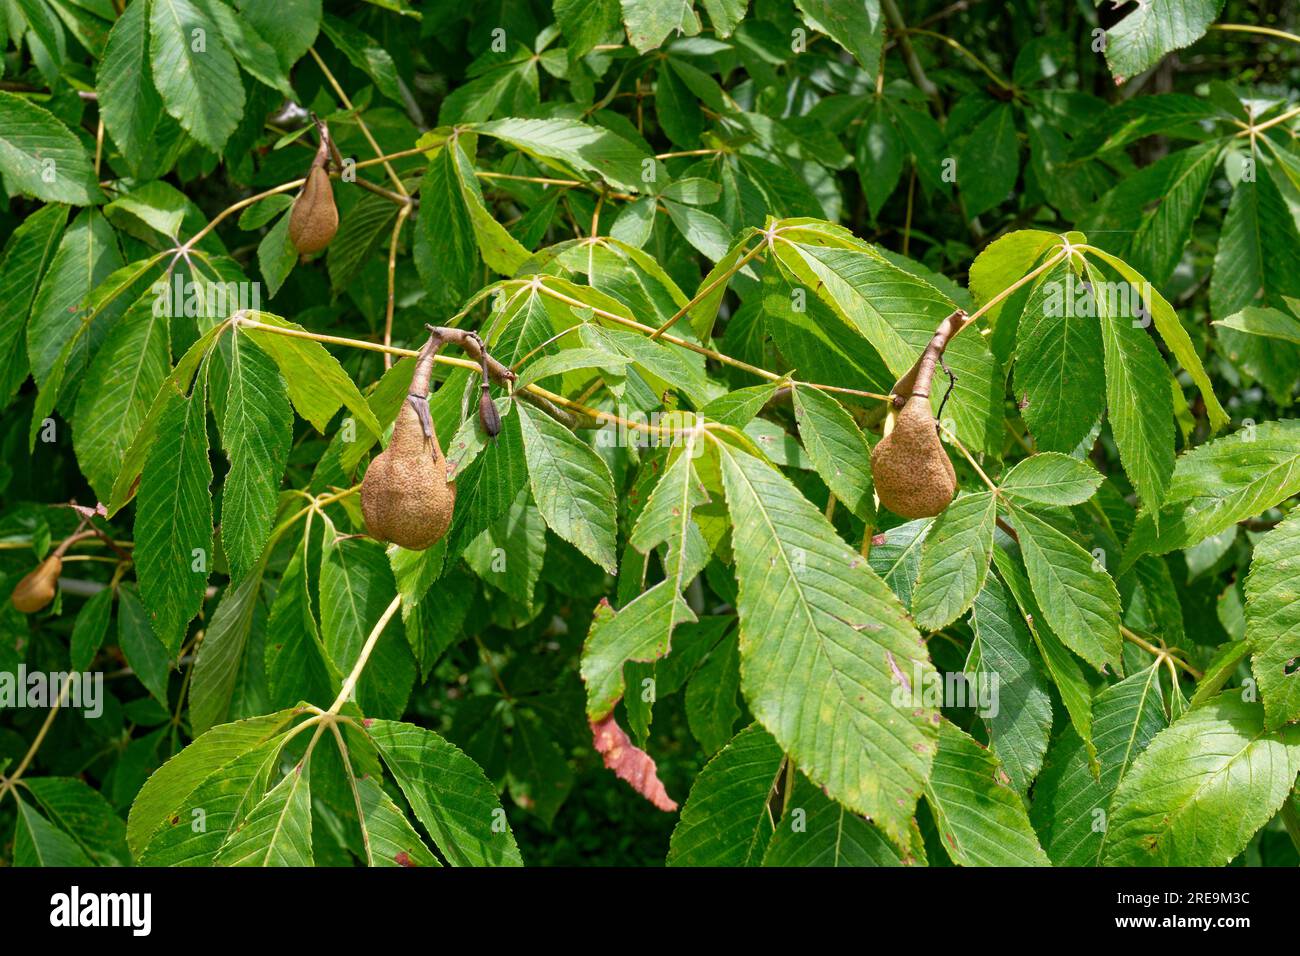 Closeup view of the fruit hanging from a Japanese horse chestnut tree surrounded by the foliage on a sunny day in summertime Stock Photo